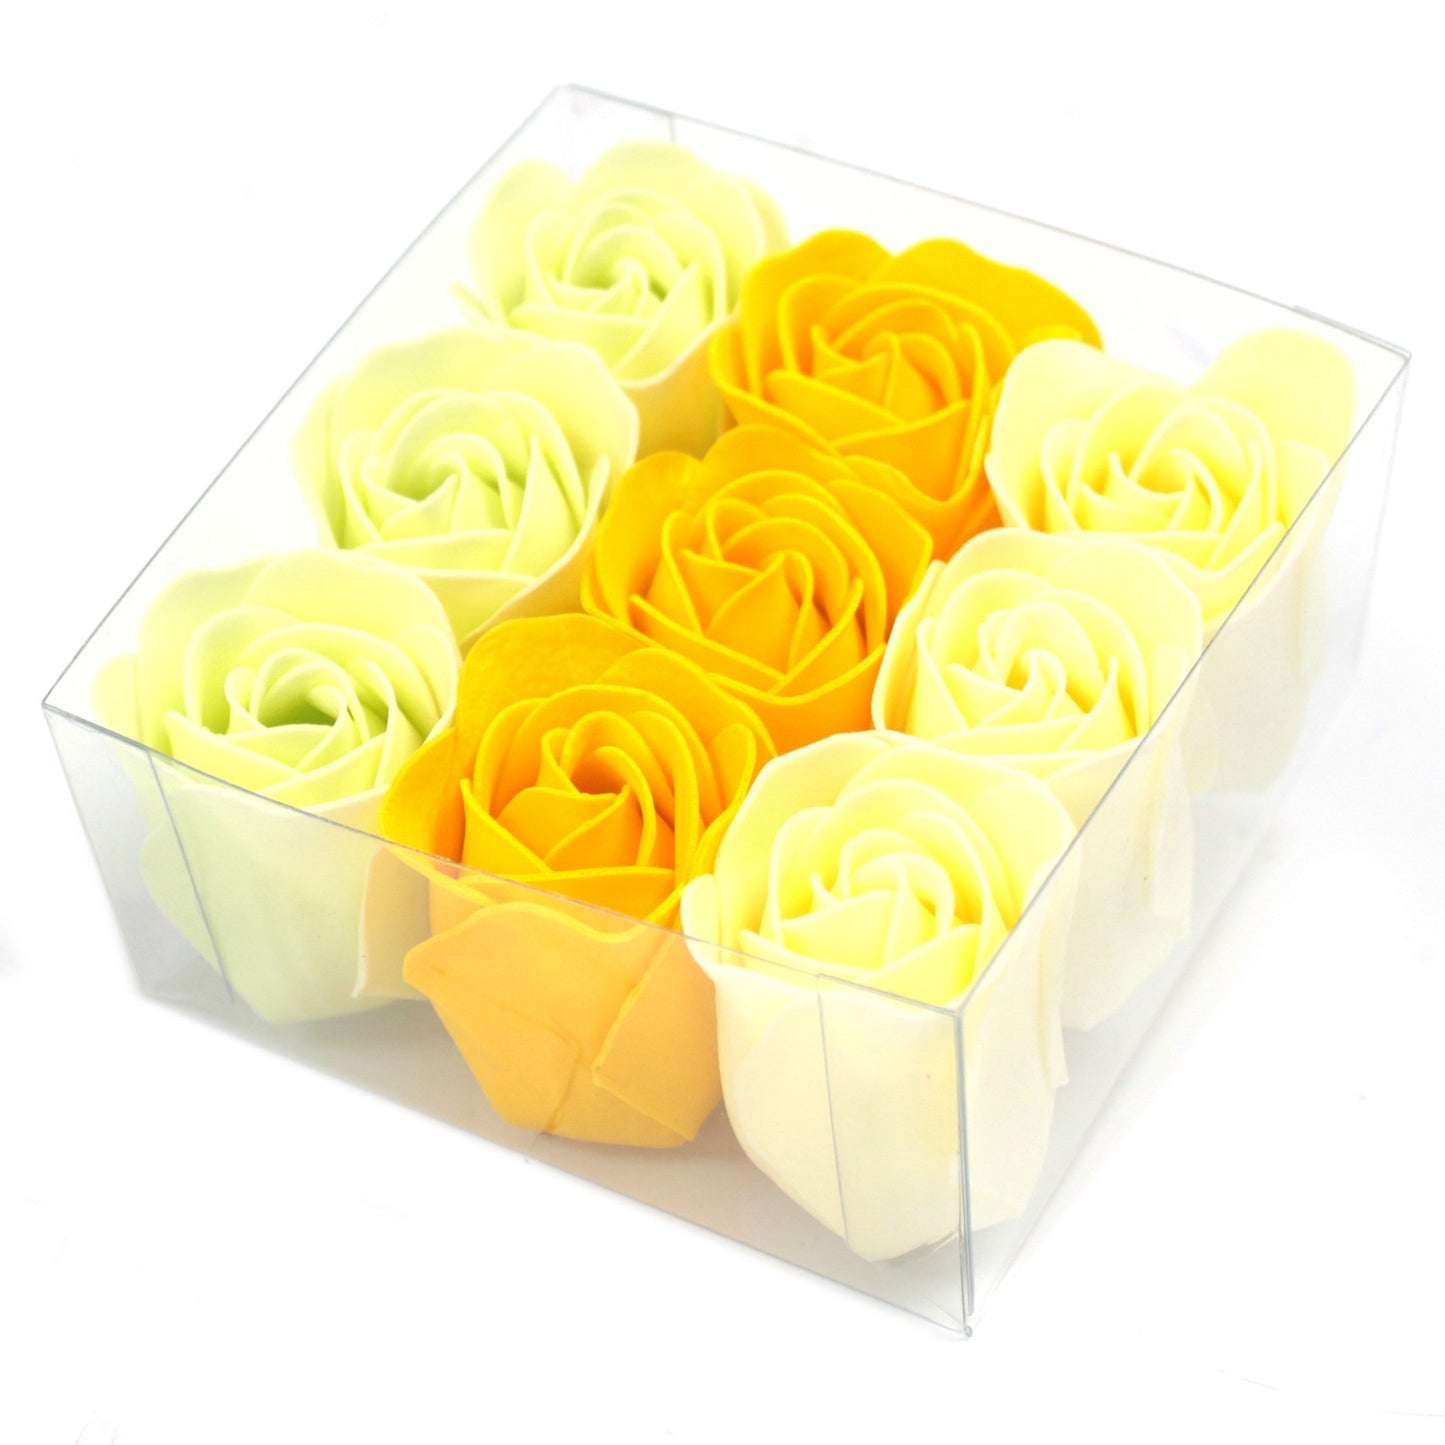 Set of 9 Soap Flowers - spring roses